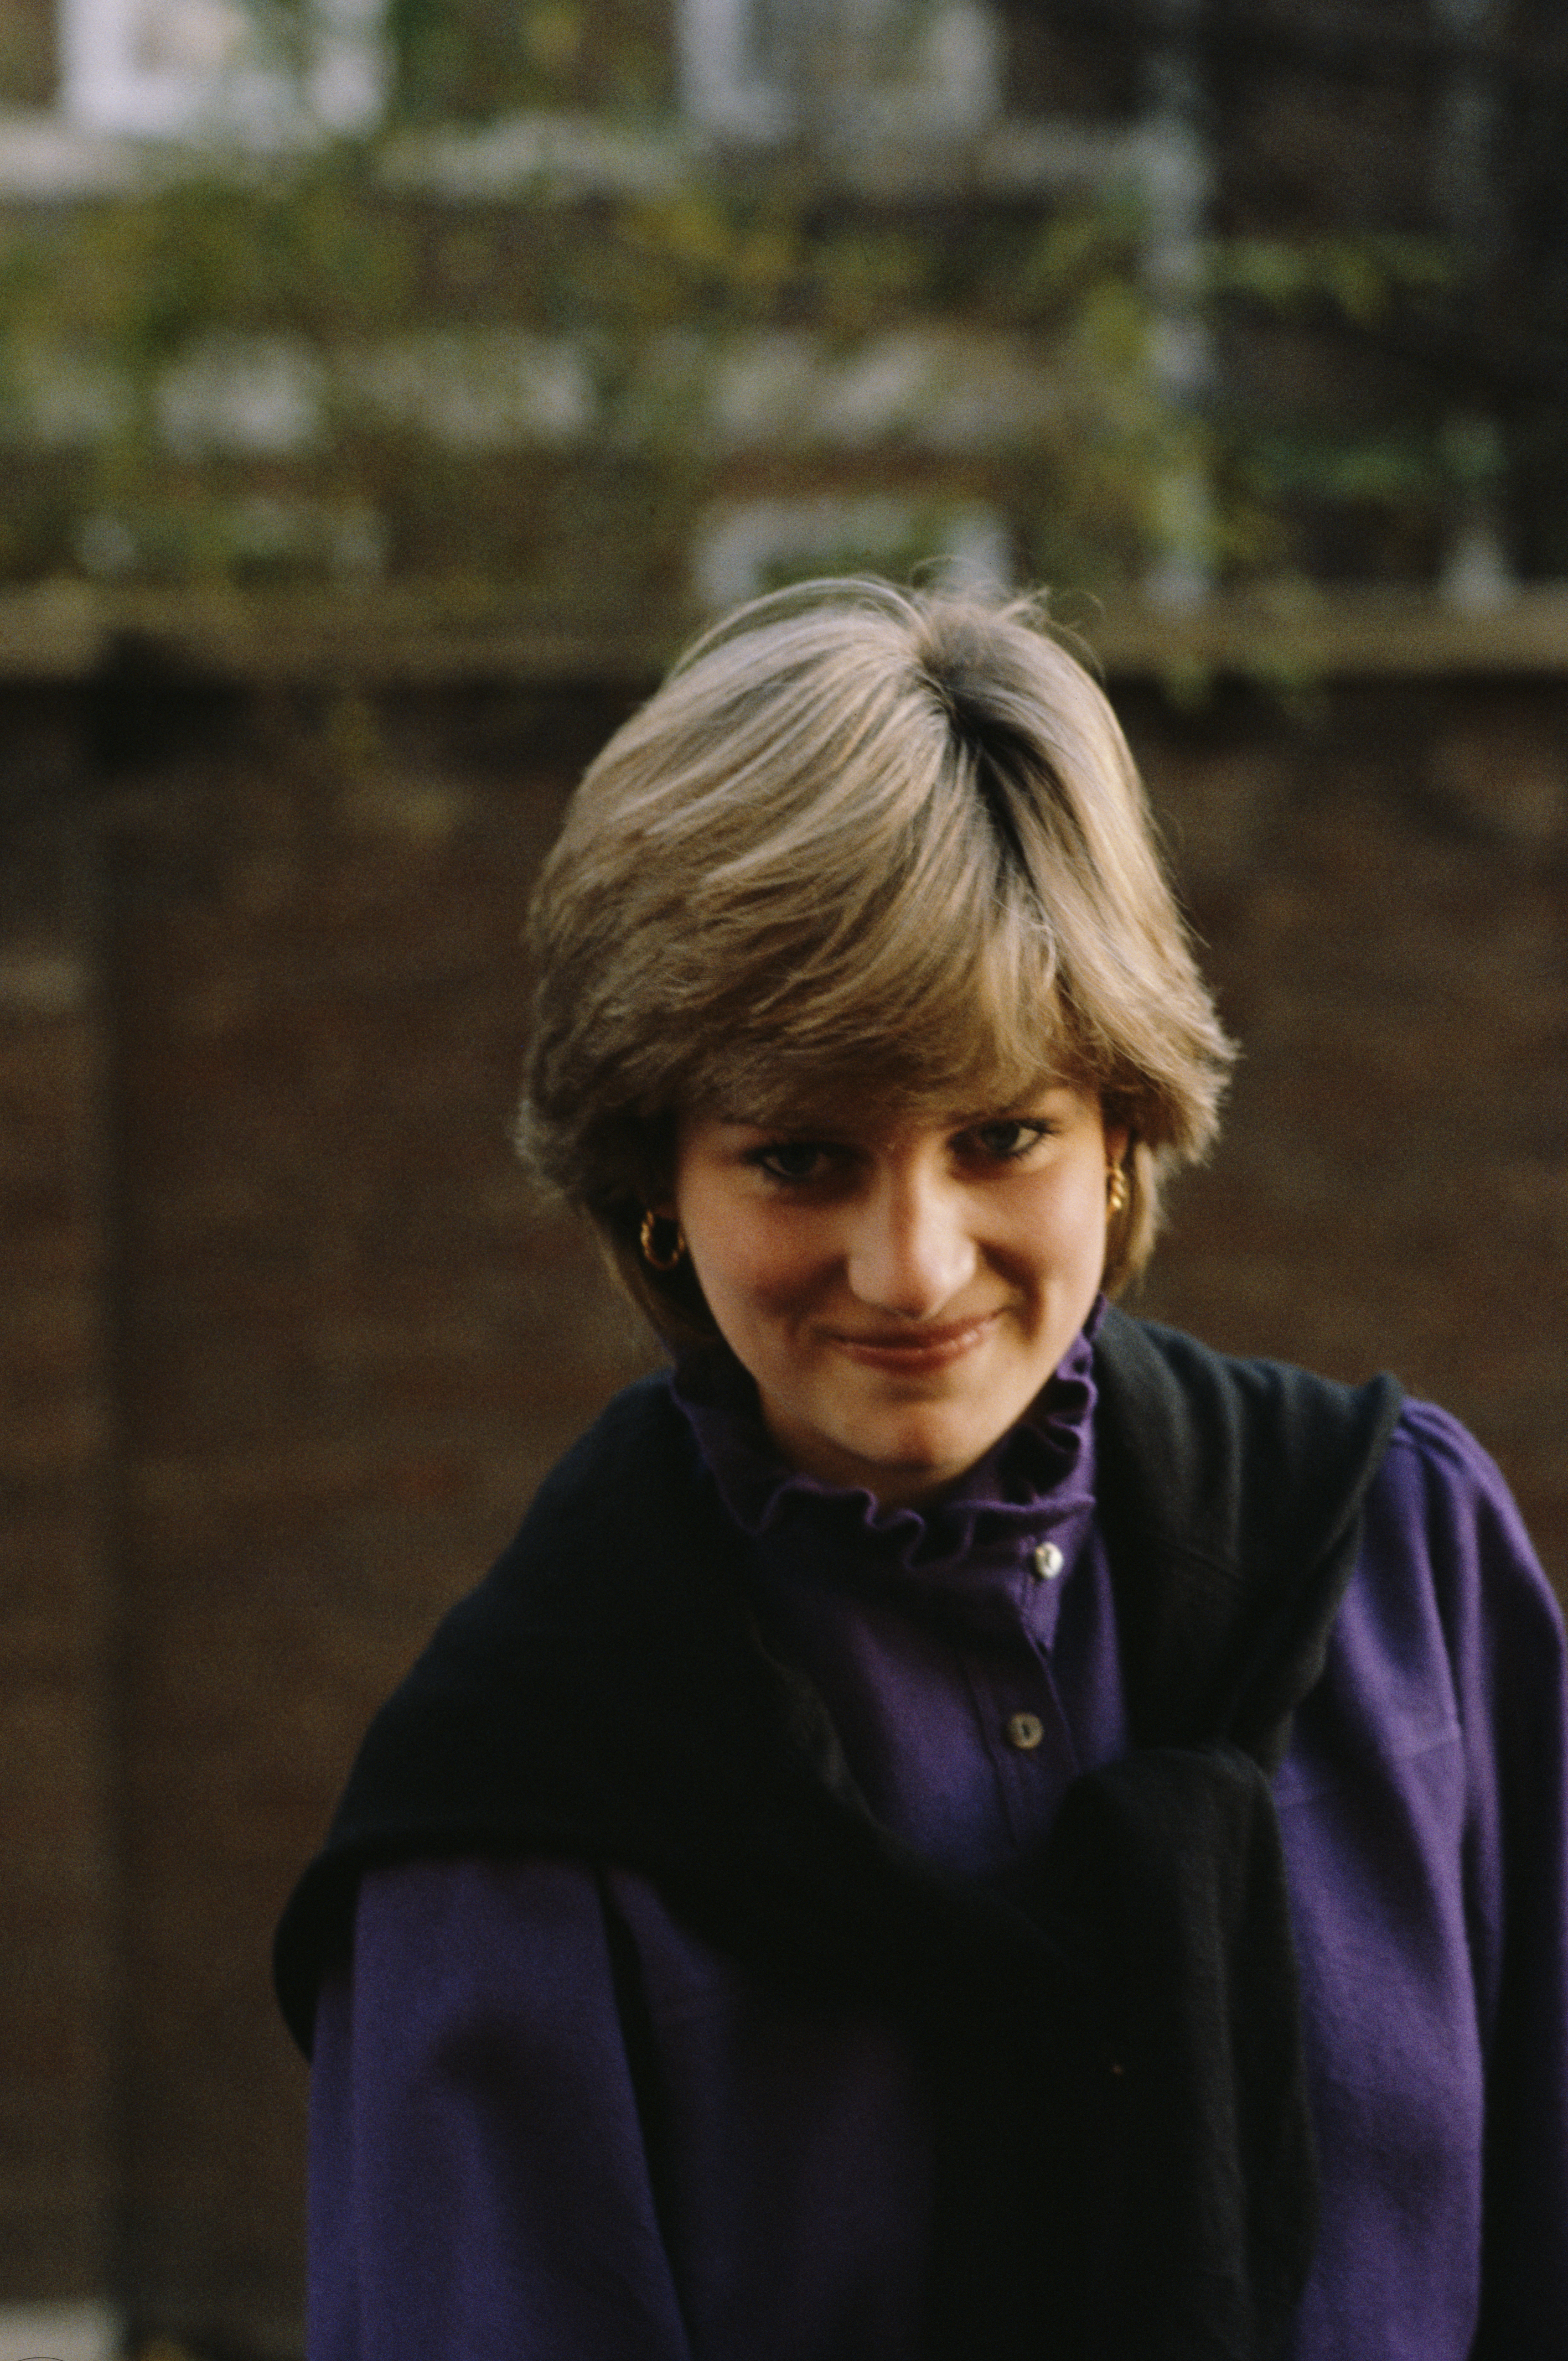 Lady Diana Spencer photographed on January 1, 1980 | Source: Getty Images